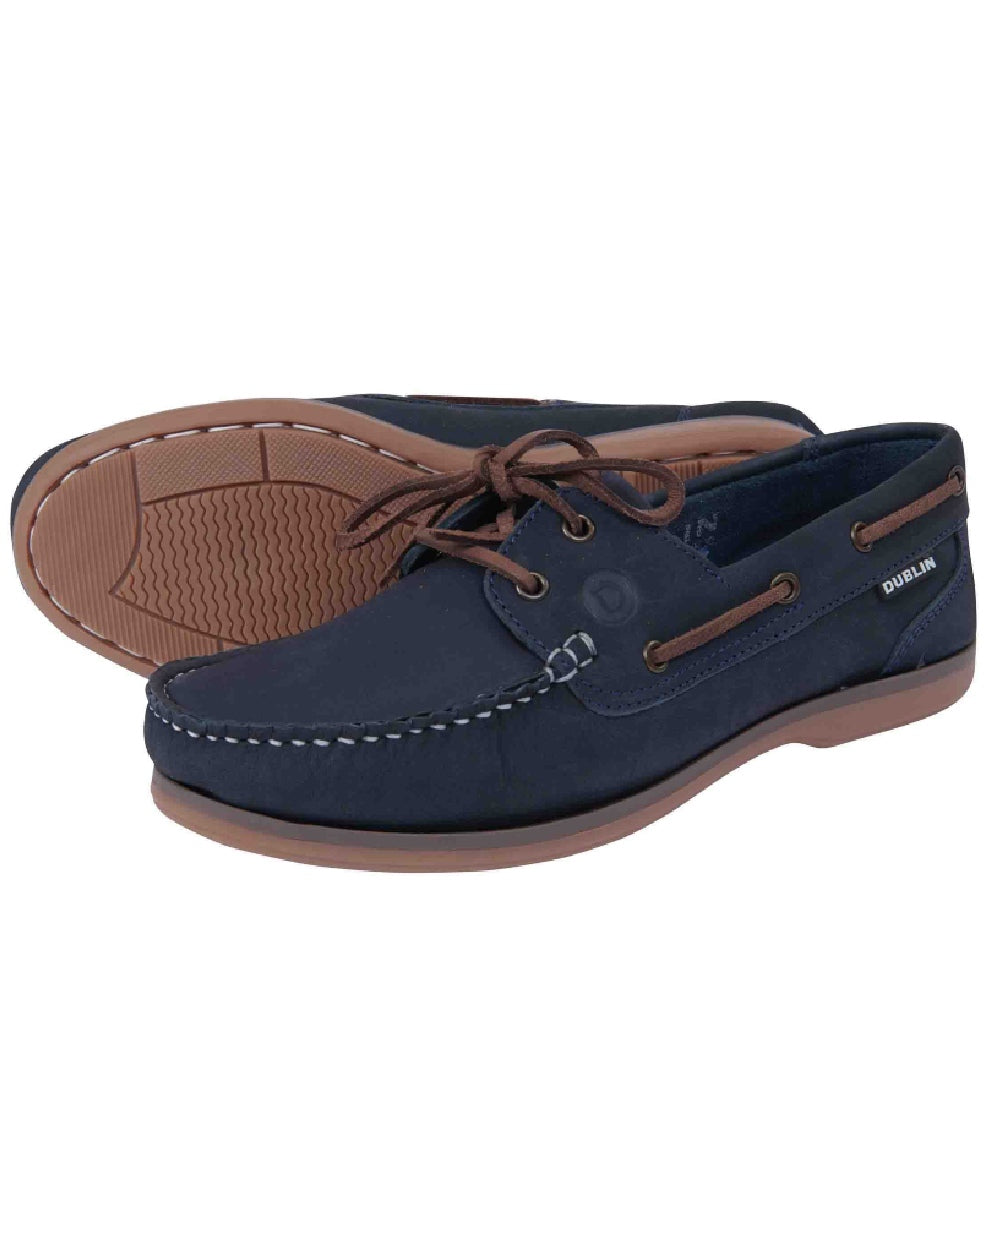 Dublin Broadfield Arena Shoes in Navy 